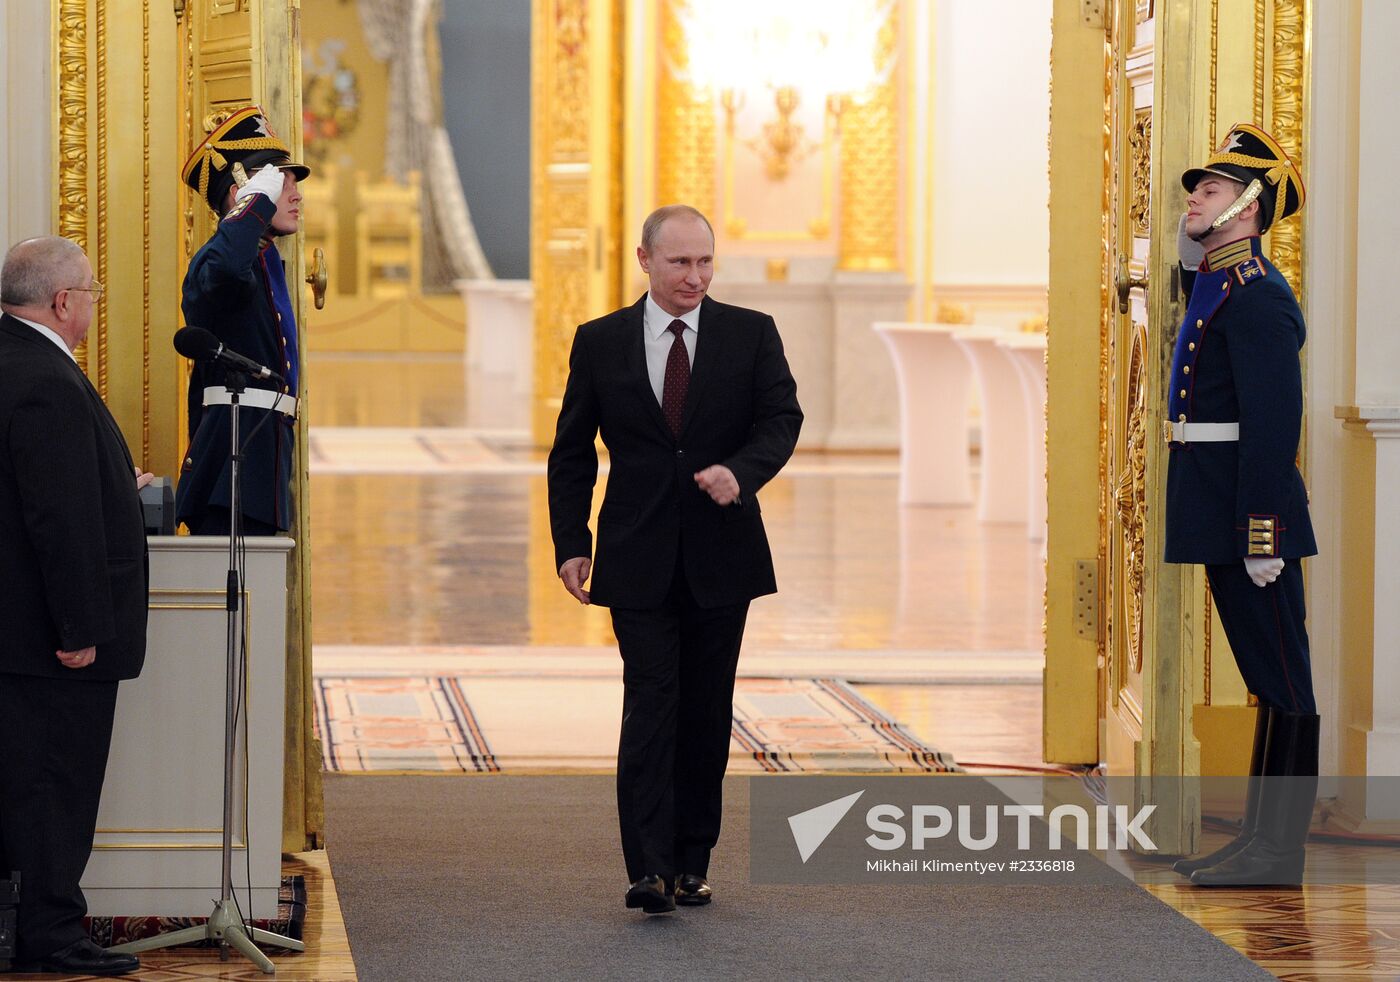 Vladimir Putin's annual address to Federal Assembly